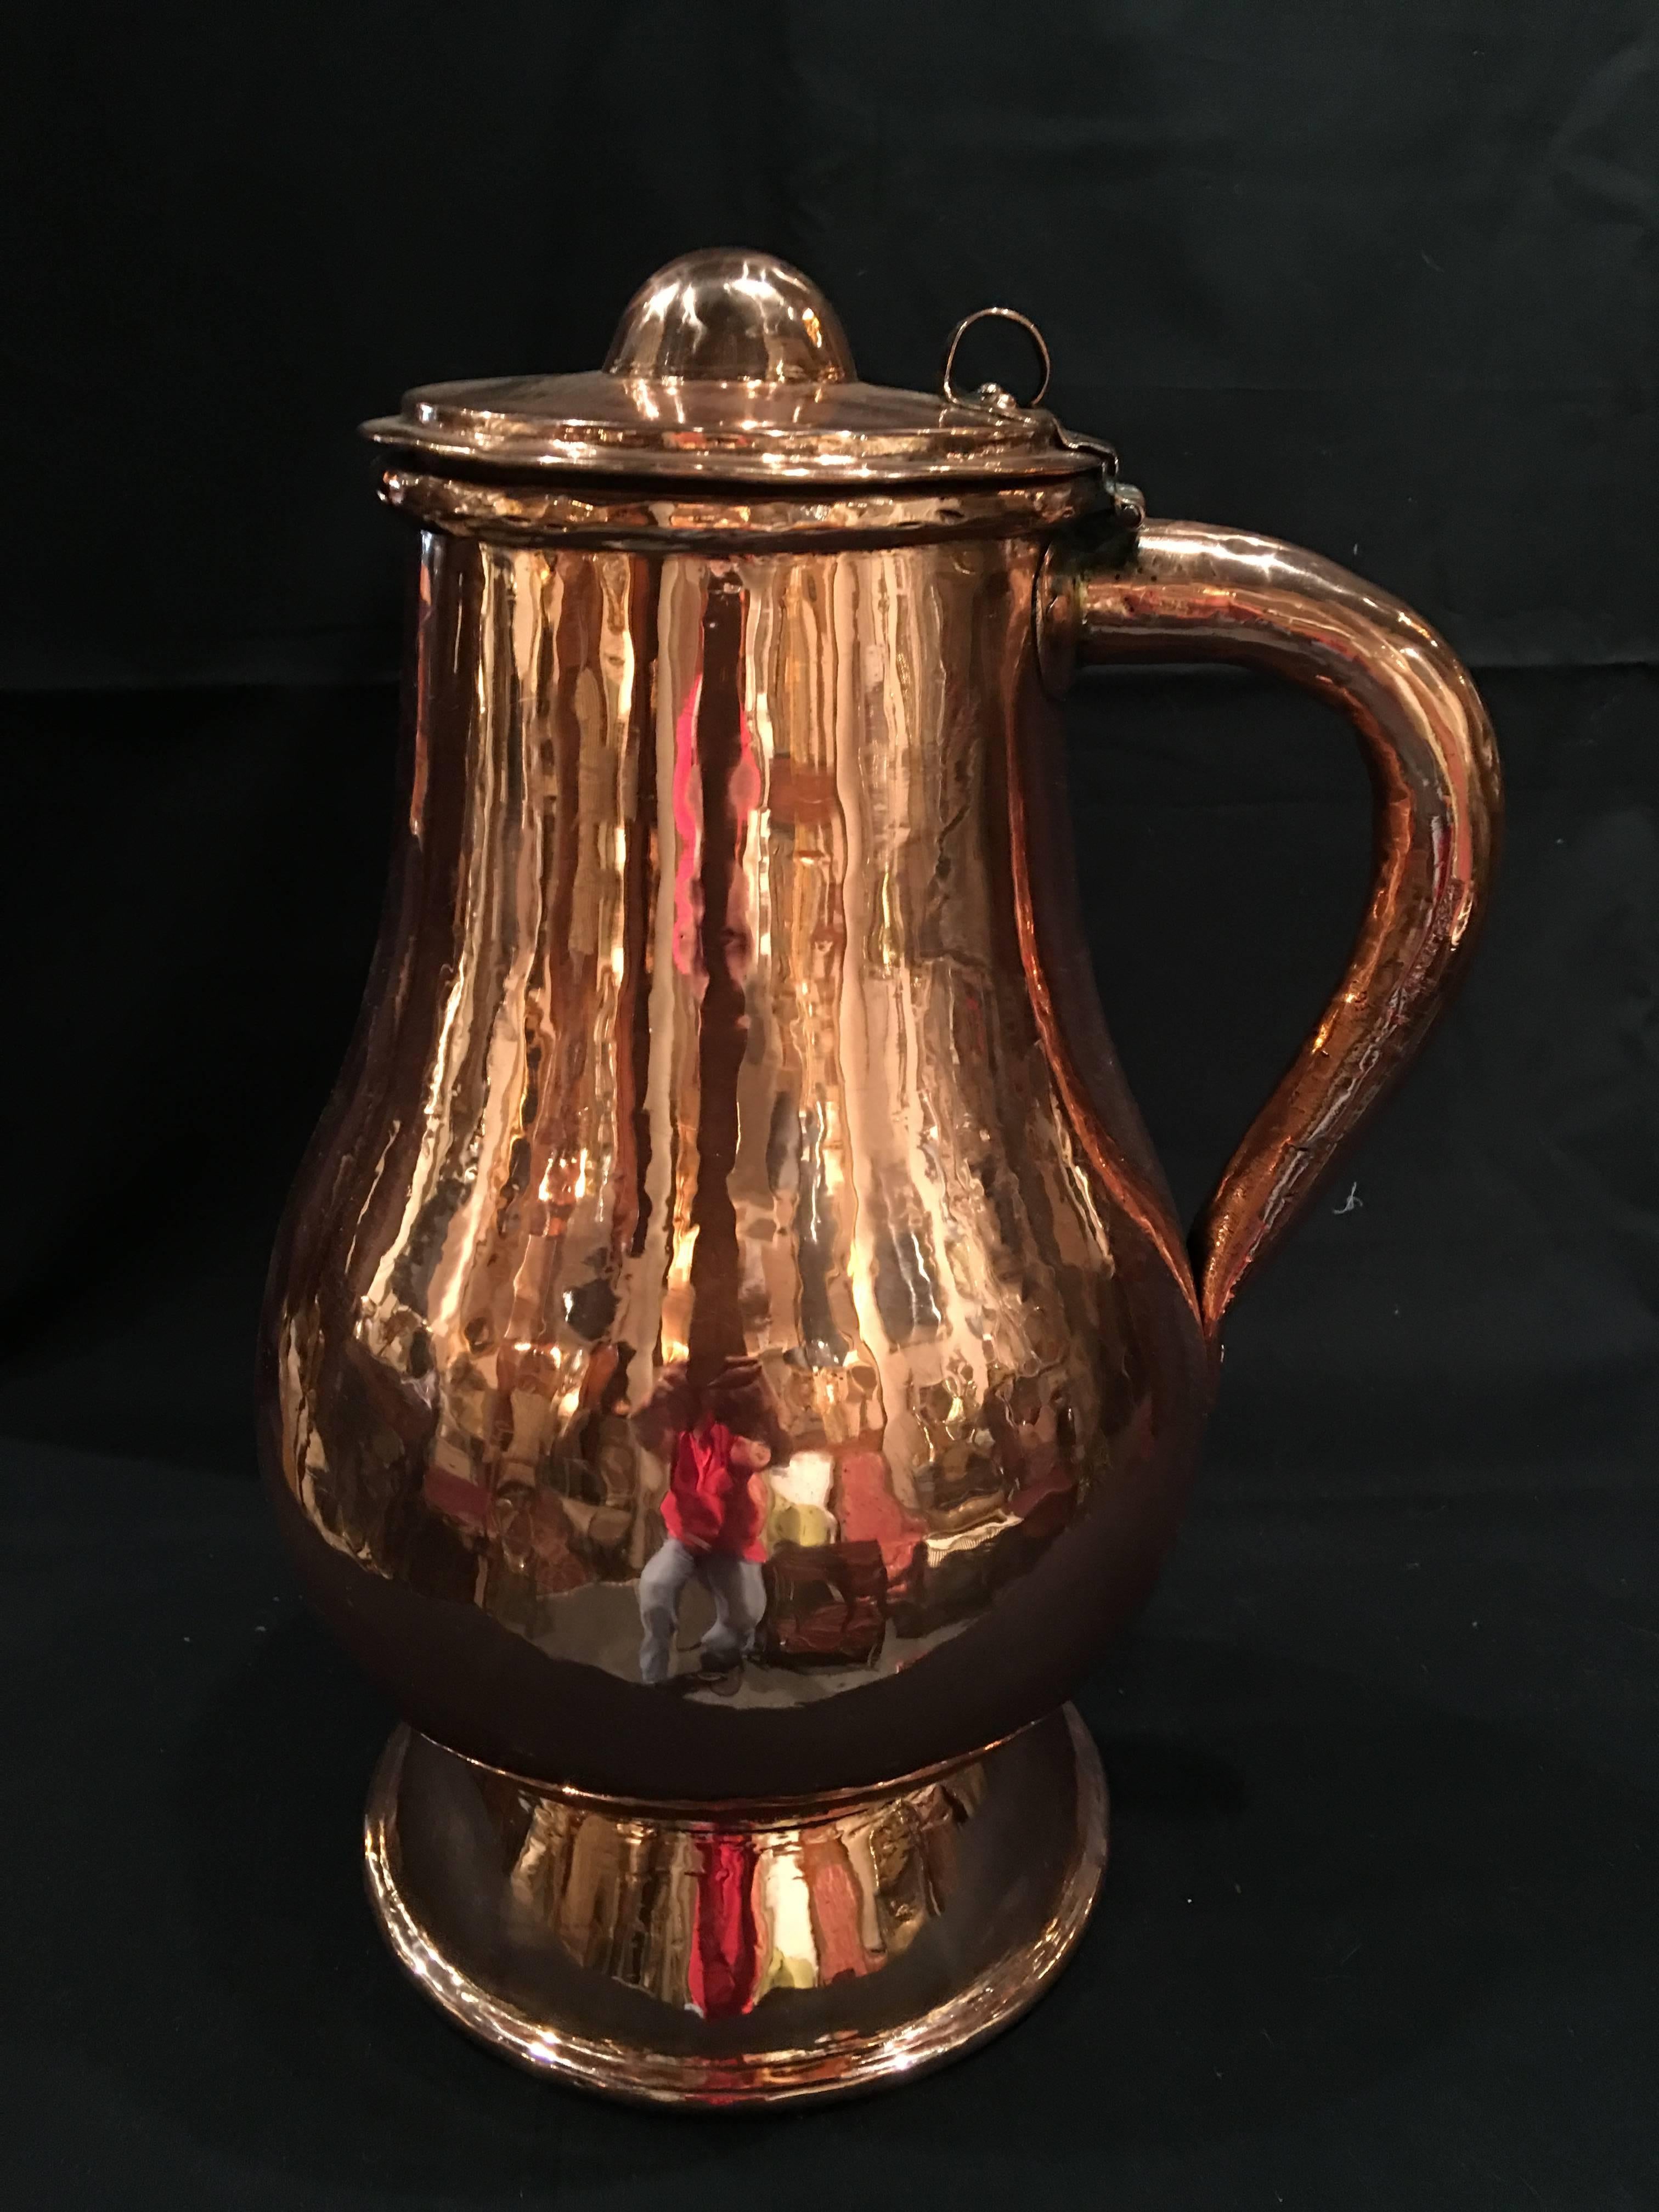 French polished copper jug or pitcher with lid and handle, 19th century.